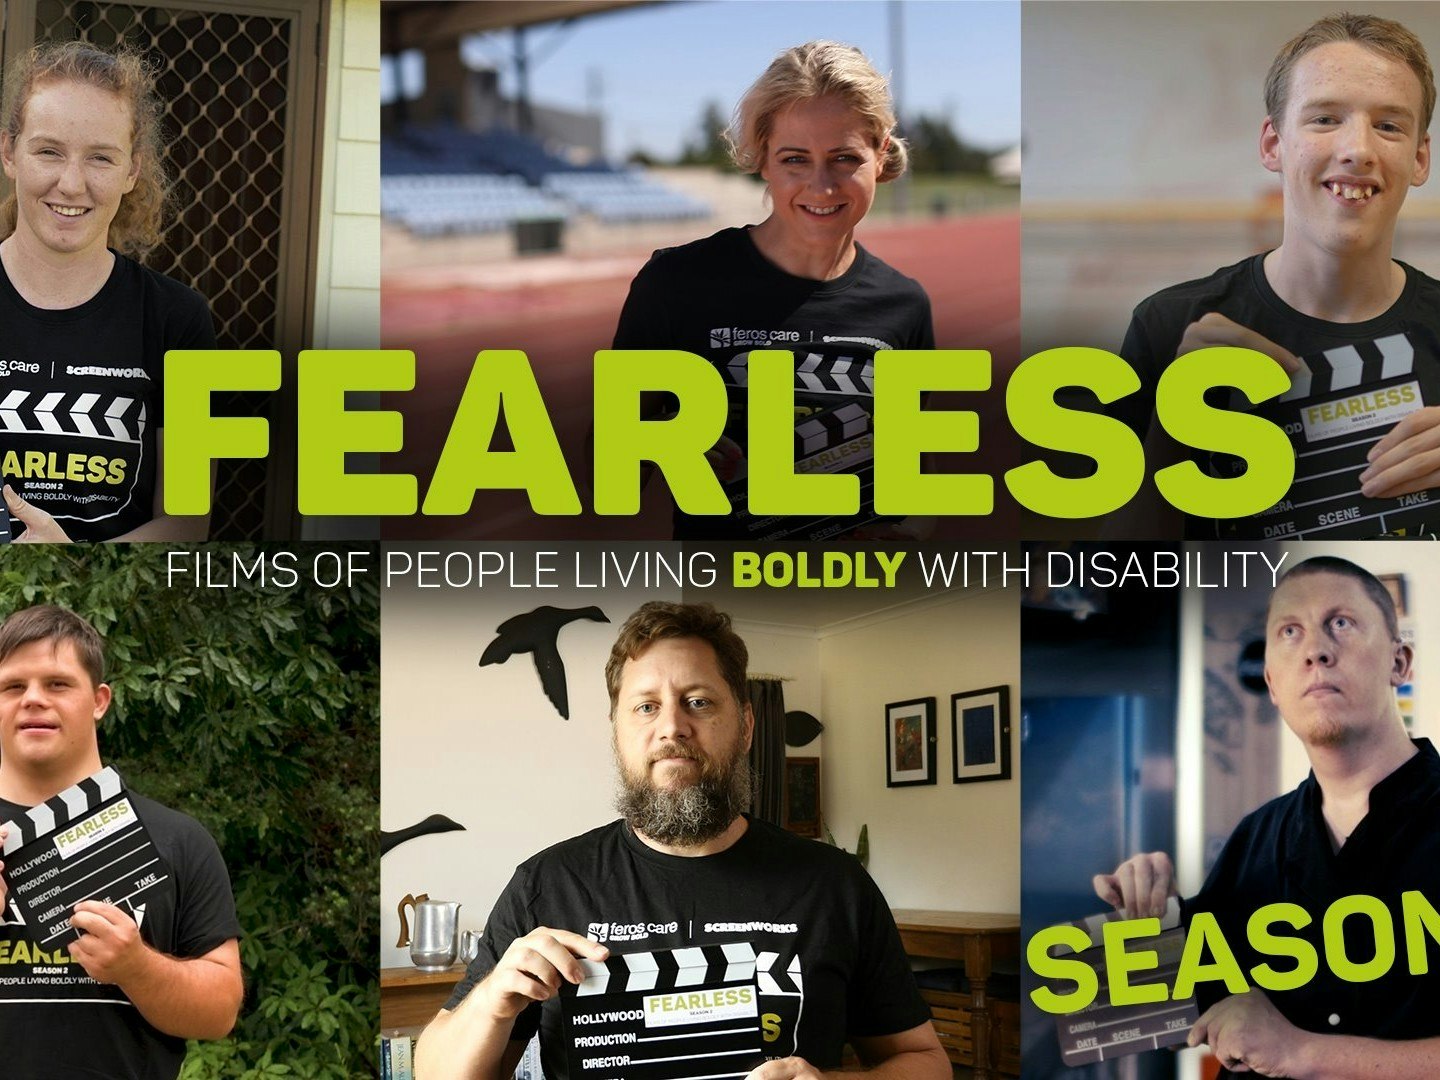 Fearless Films Season 2 premieres on Thursday, 3 December &#8211; International Day of People with Disability [Source: Feros Care]. 
